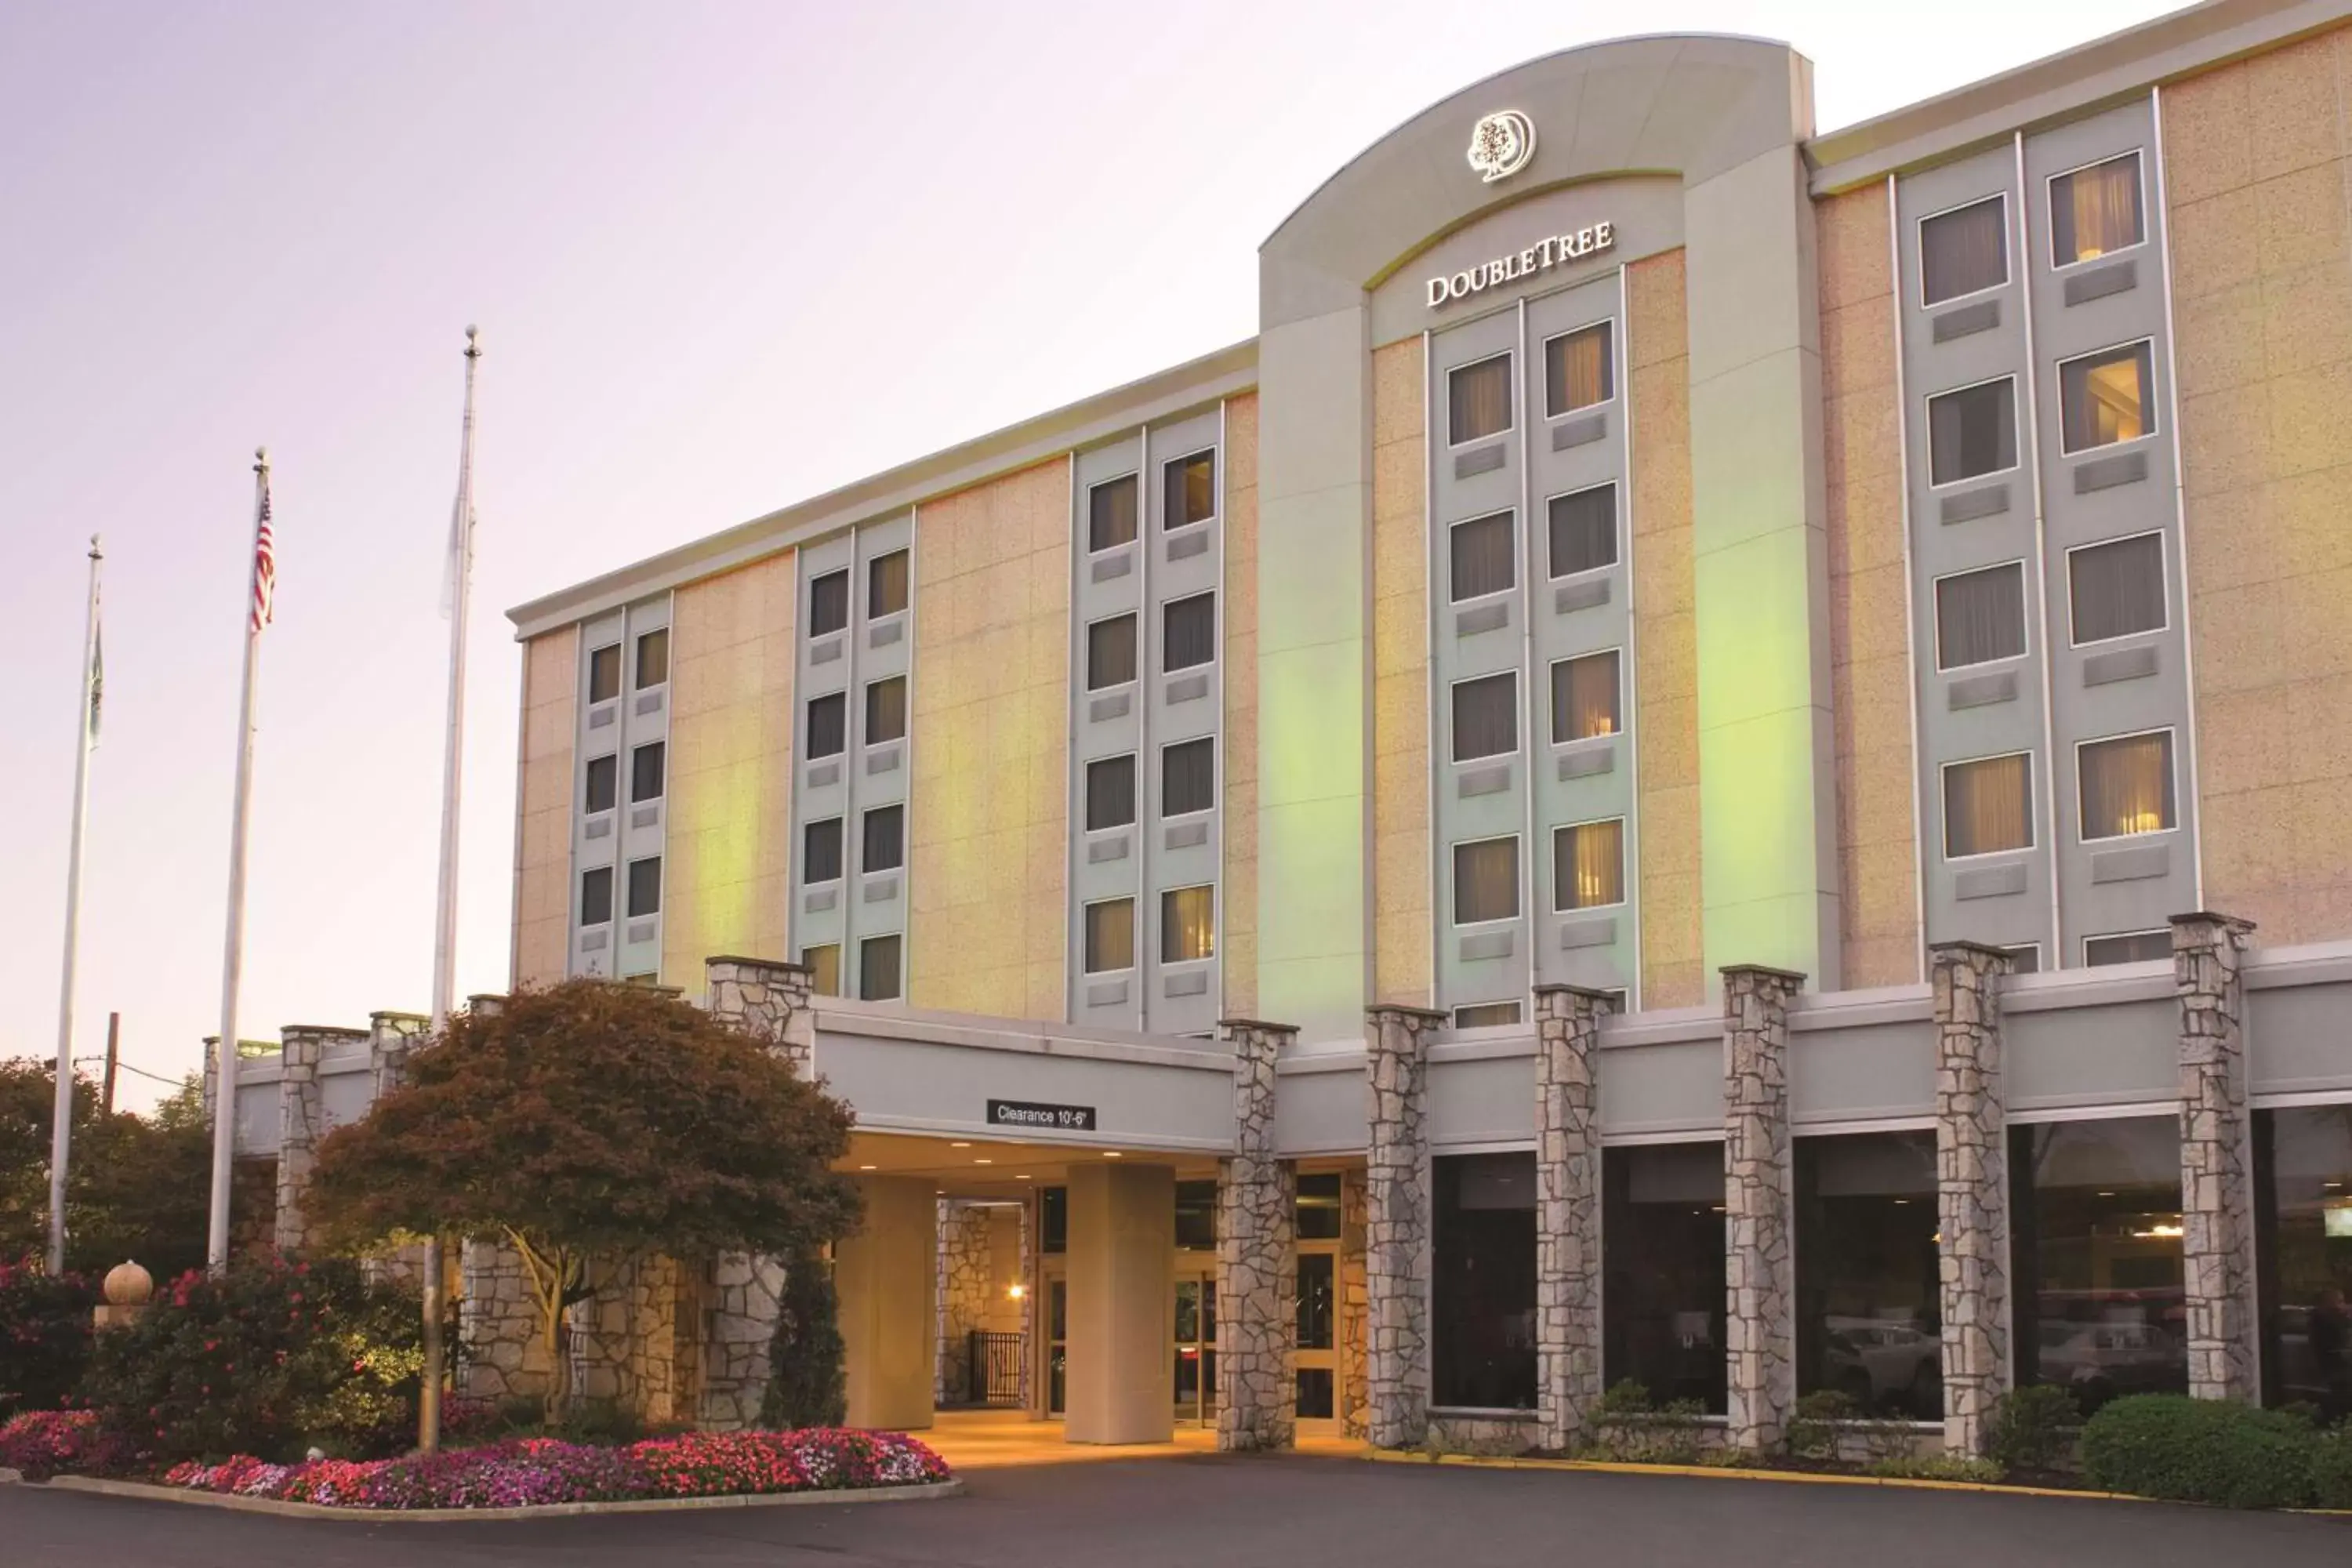 Property Building in DoubleTree by Hilton Pittsburgh Airport